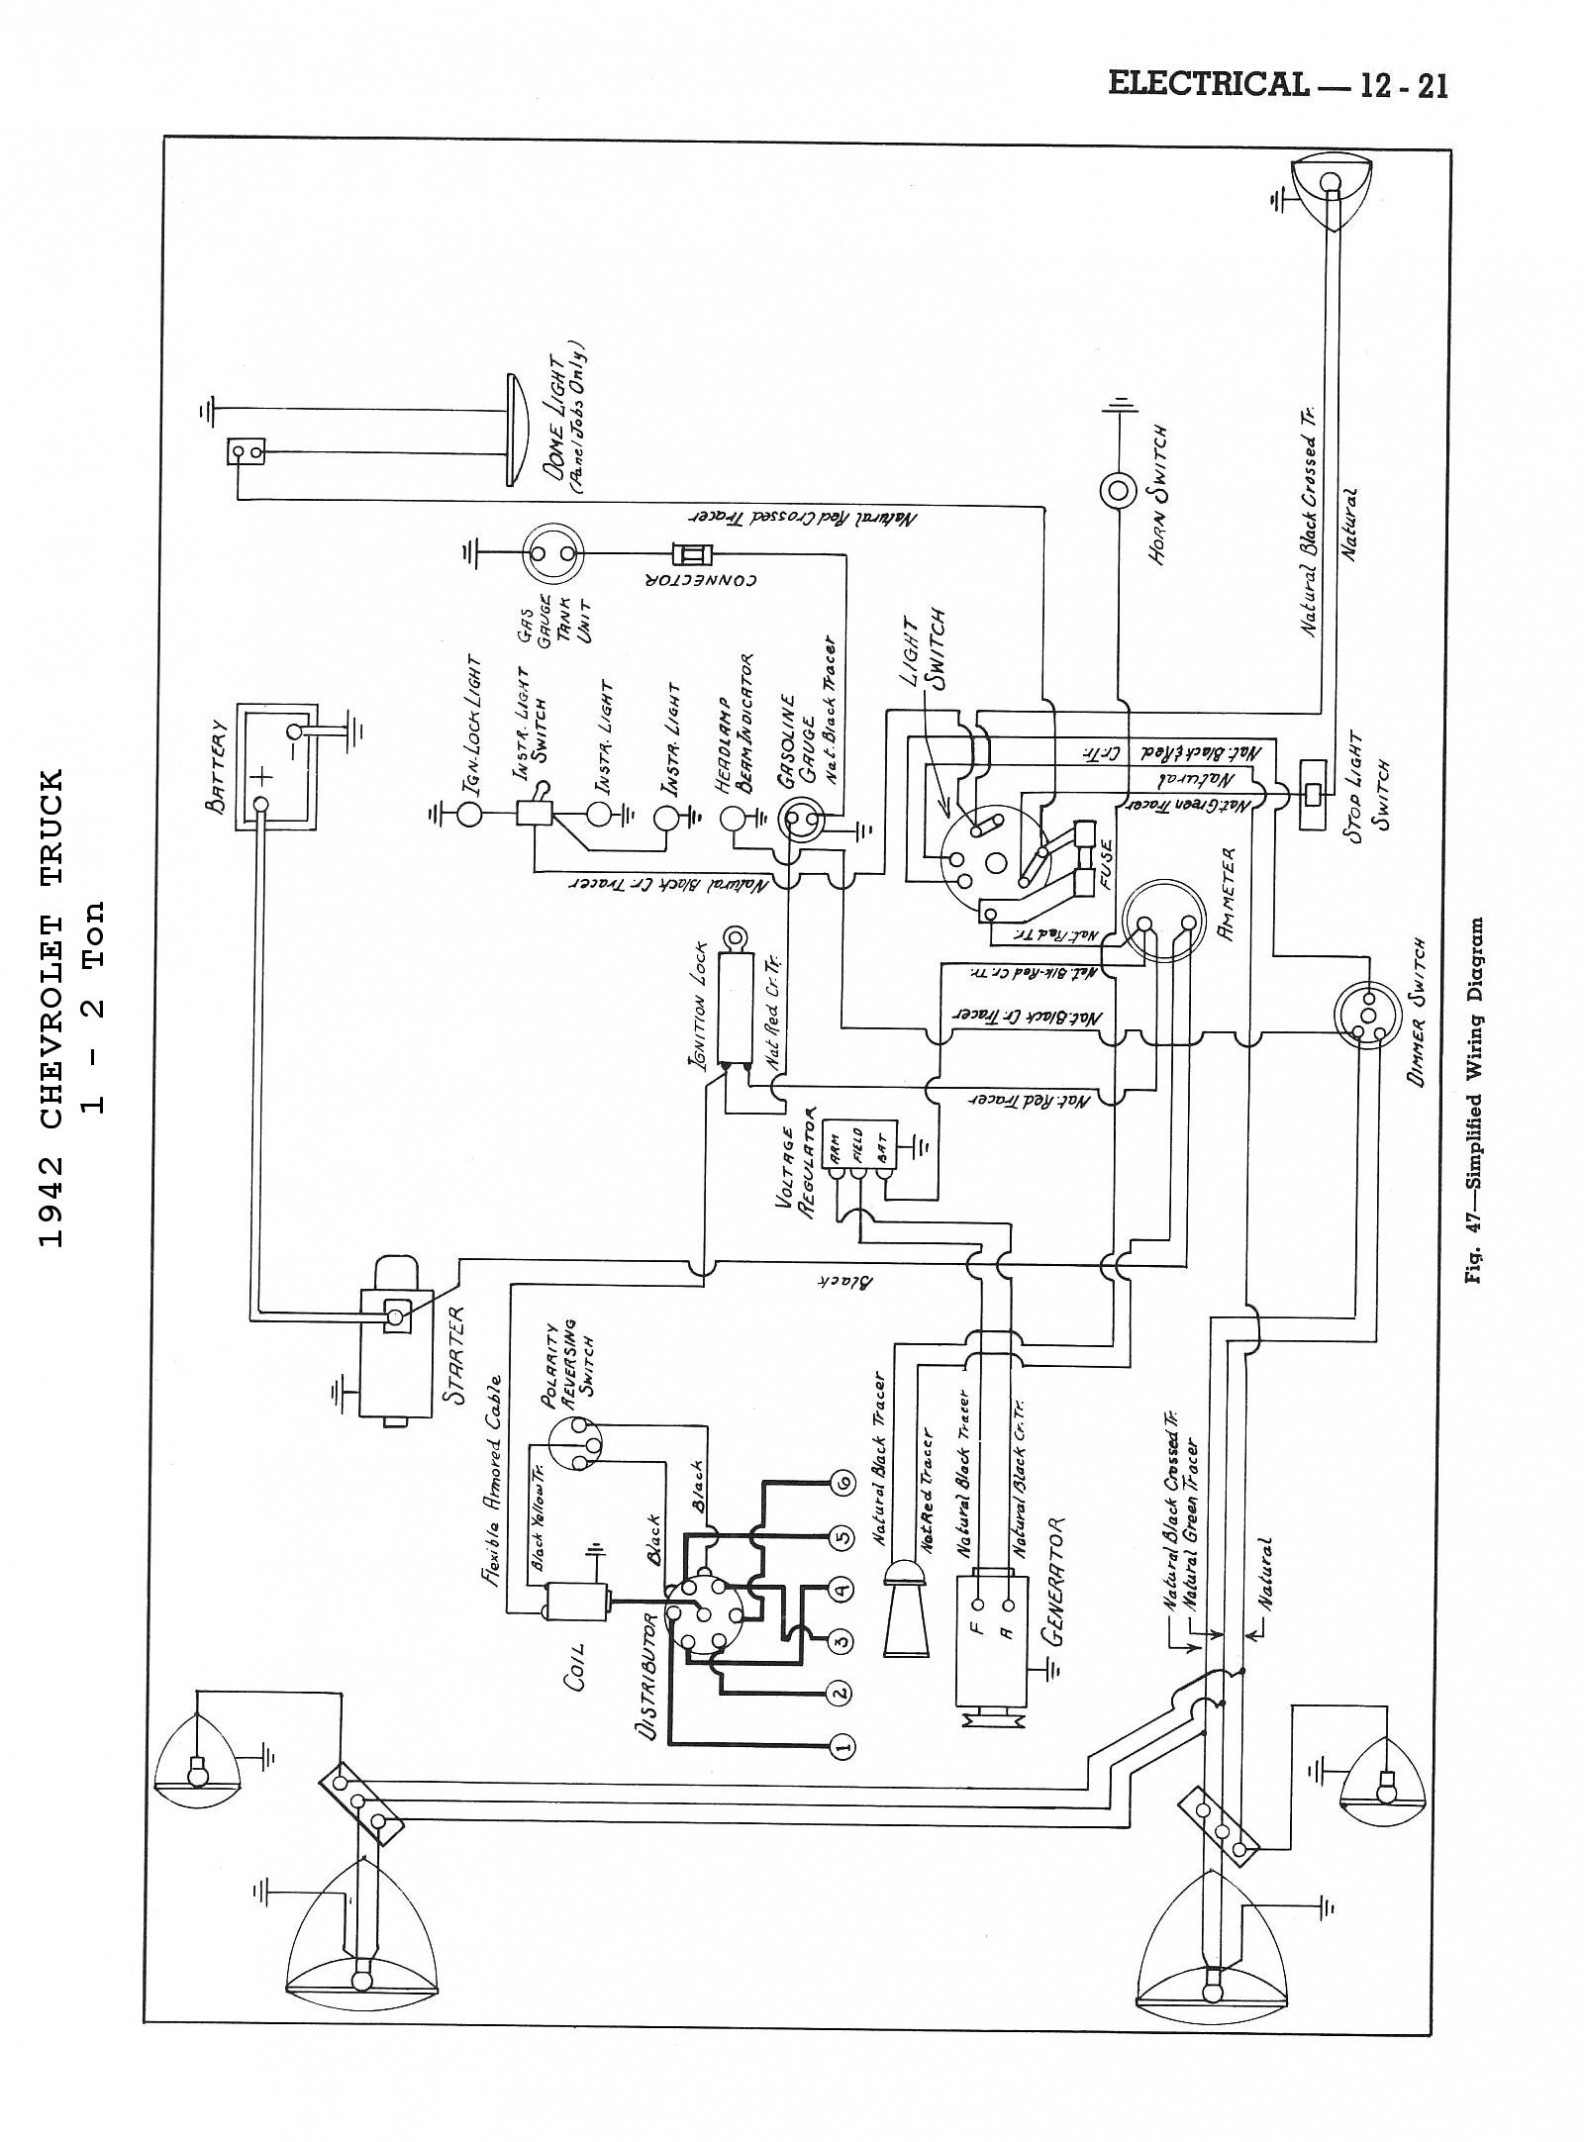 Chevrolet Truck Wiring Diagrams Periodic Table Yellow Best Series Circuit Diagram – Turn Signal Of Chevrolet Truck Wiring Diagrams